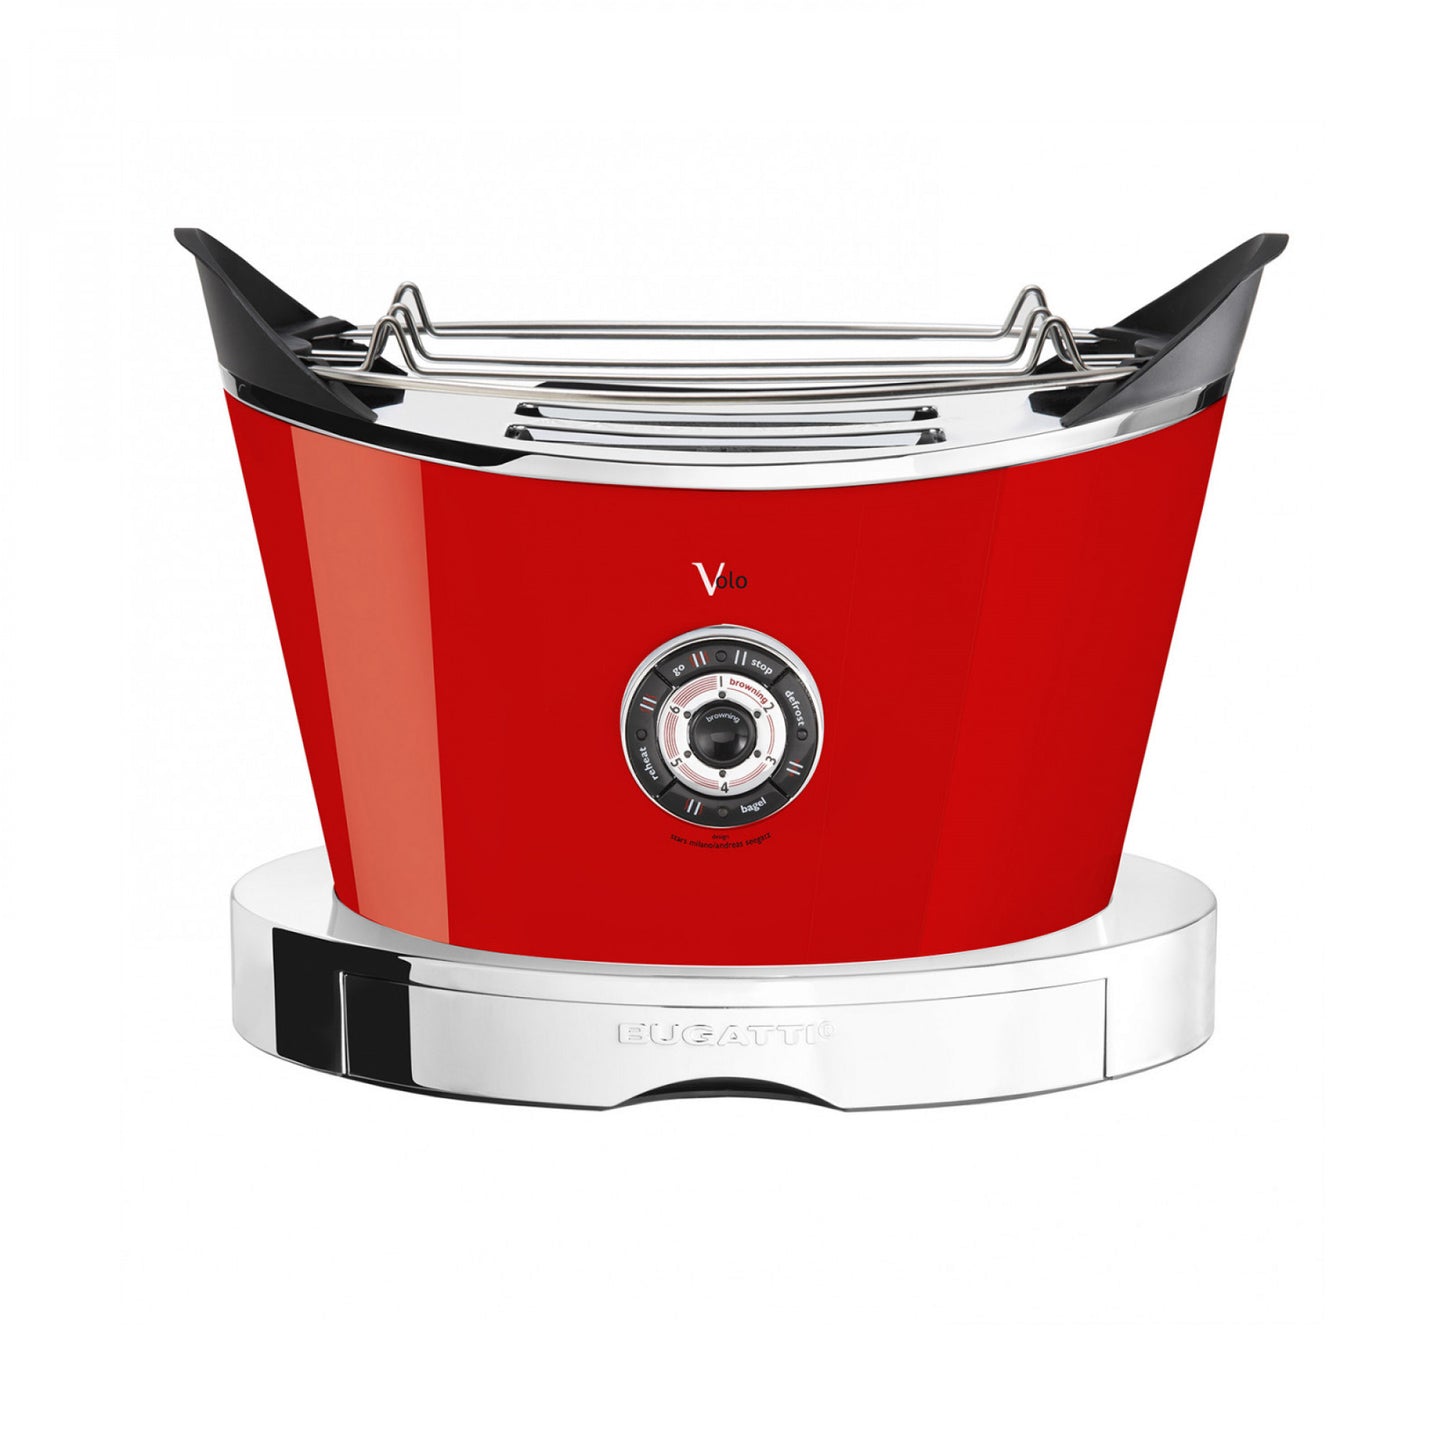 VOLO Toaster Red Plain